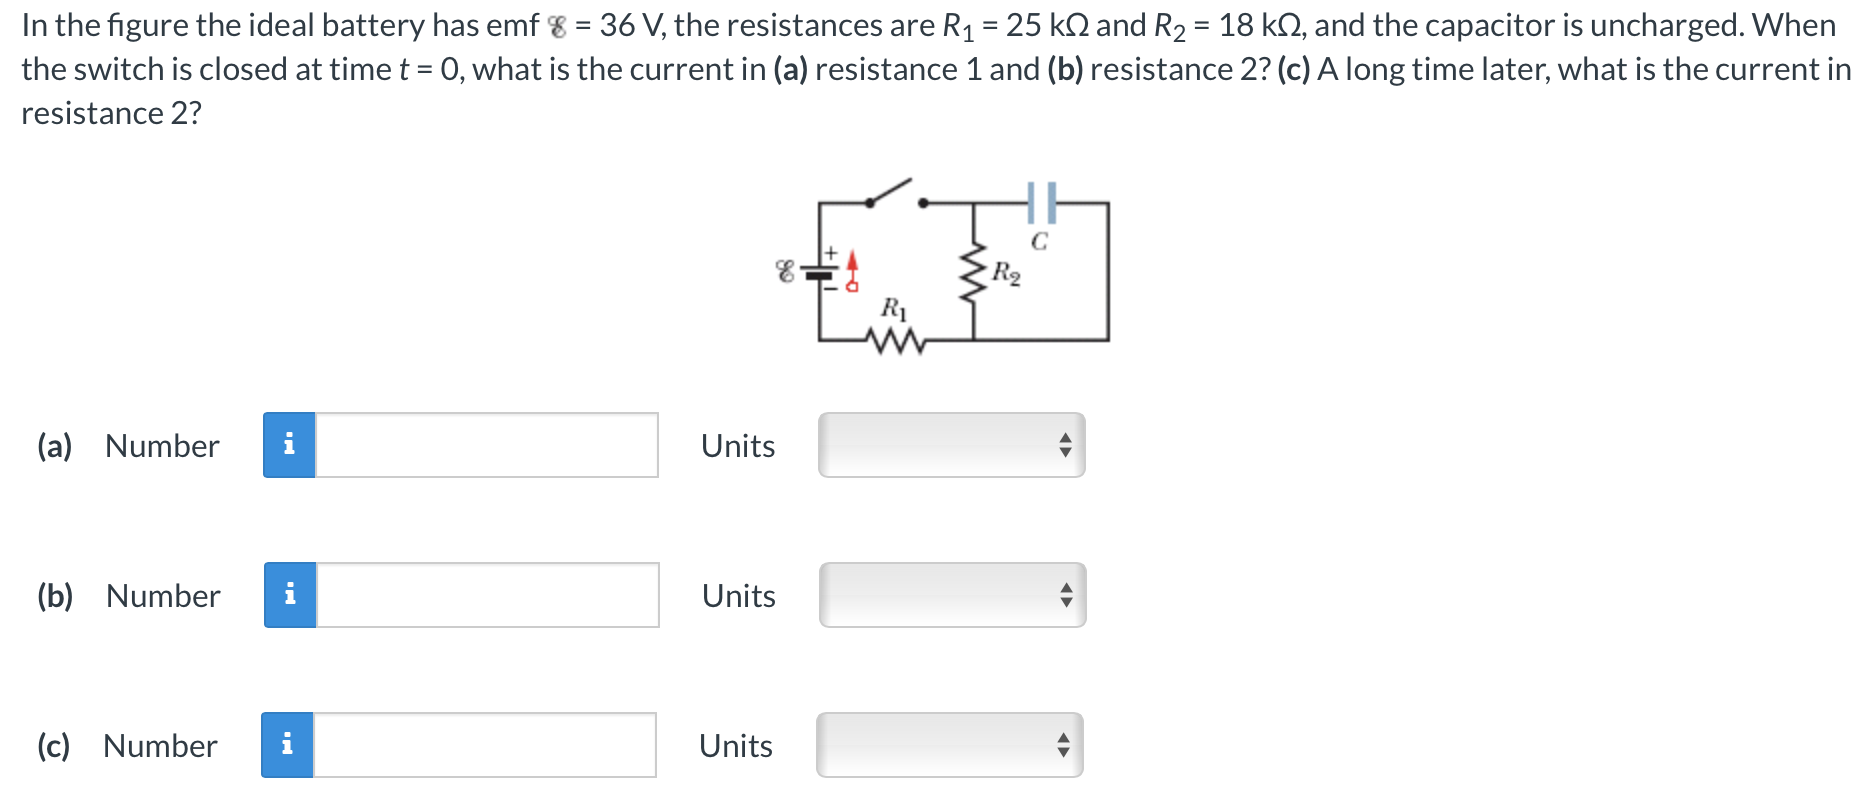 In the figure the ideal battery has emf ε = 36 V, the resistances are R1 = 25 kΩ and R2 = 18 kΩ, and the capacitor is uncharged. When the switch is closed at time t = 0, what is the current in (a) resistance 1 and (b) resistance 2? (c) A long time later, what is the current in resistance 2? (a) Number Units (b) Number Units (c) Number Units